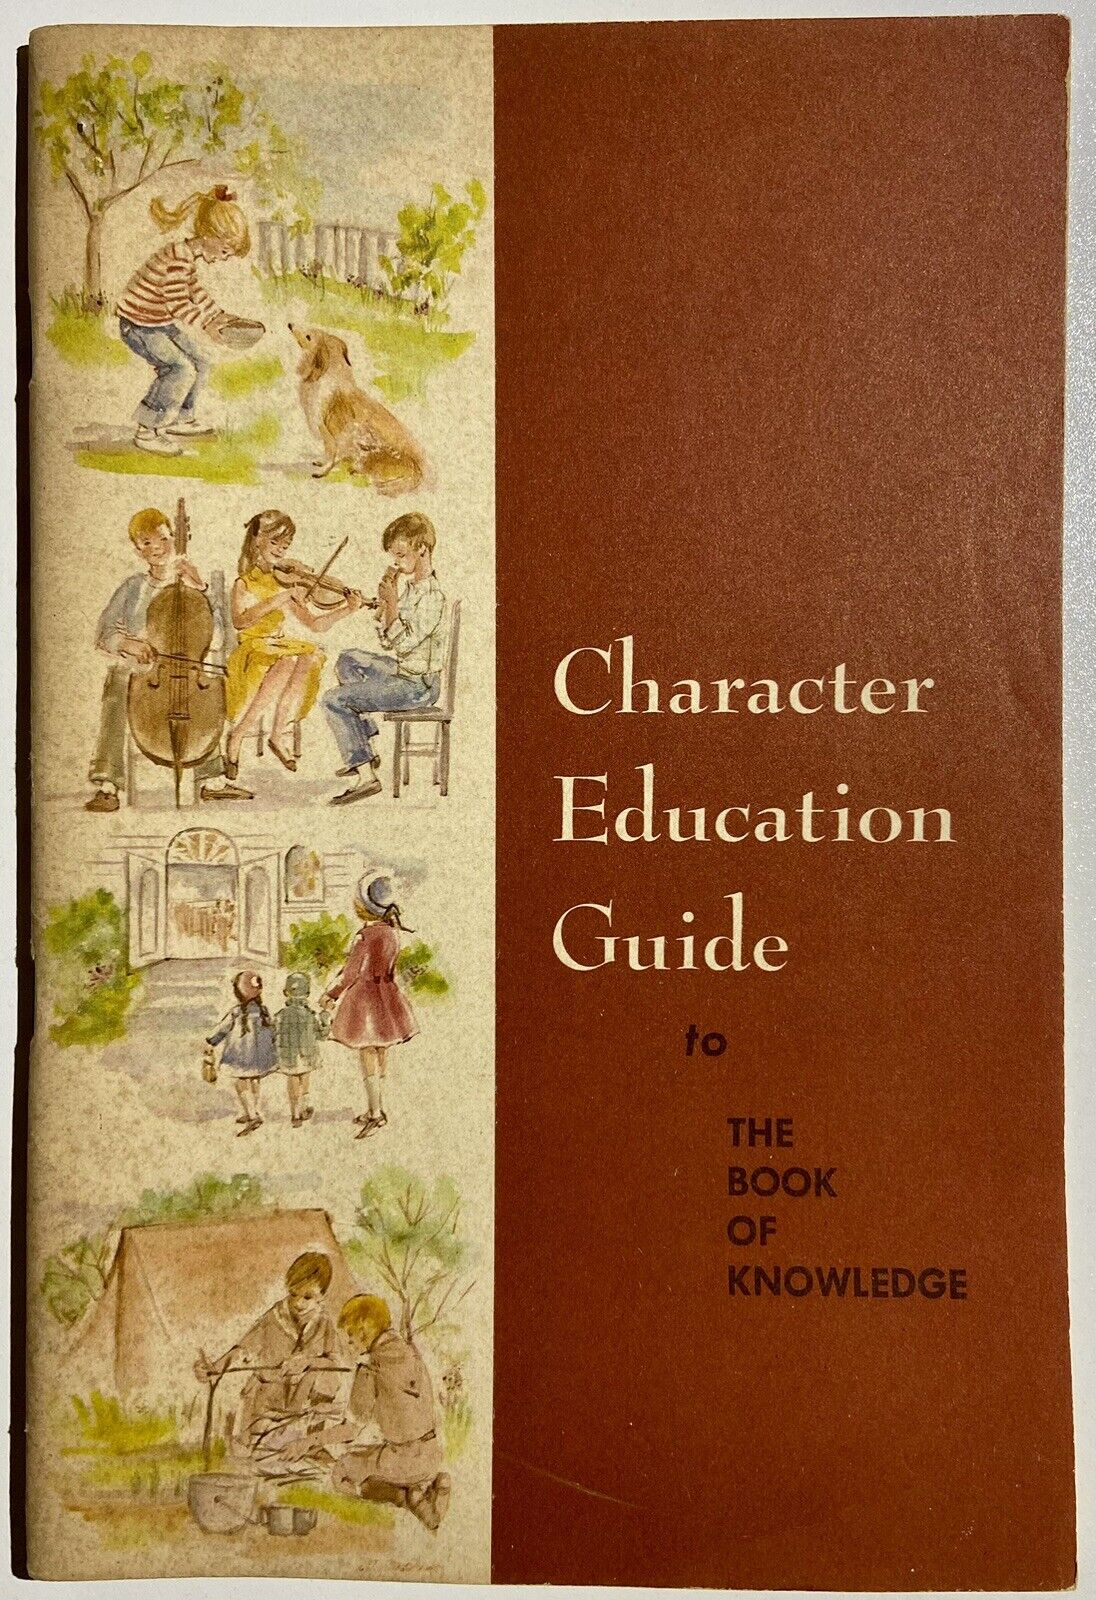 1963 Children’s Character Education Guide to the Book of Knowledge  Jean Merrier